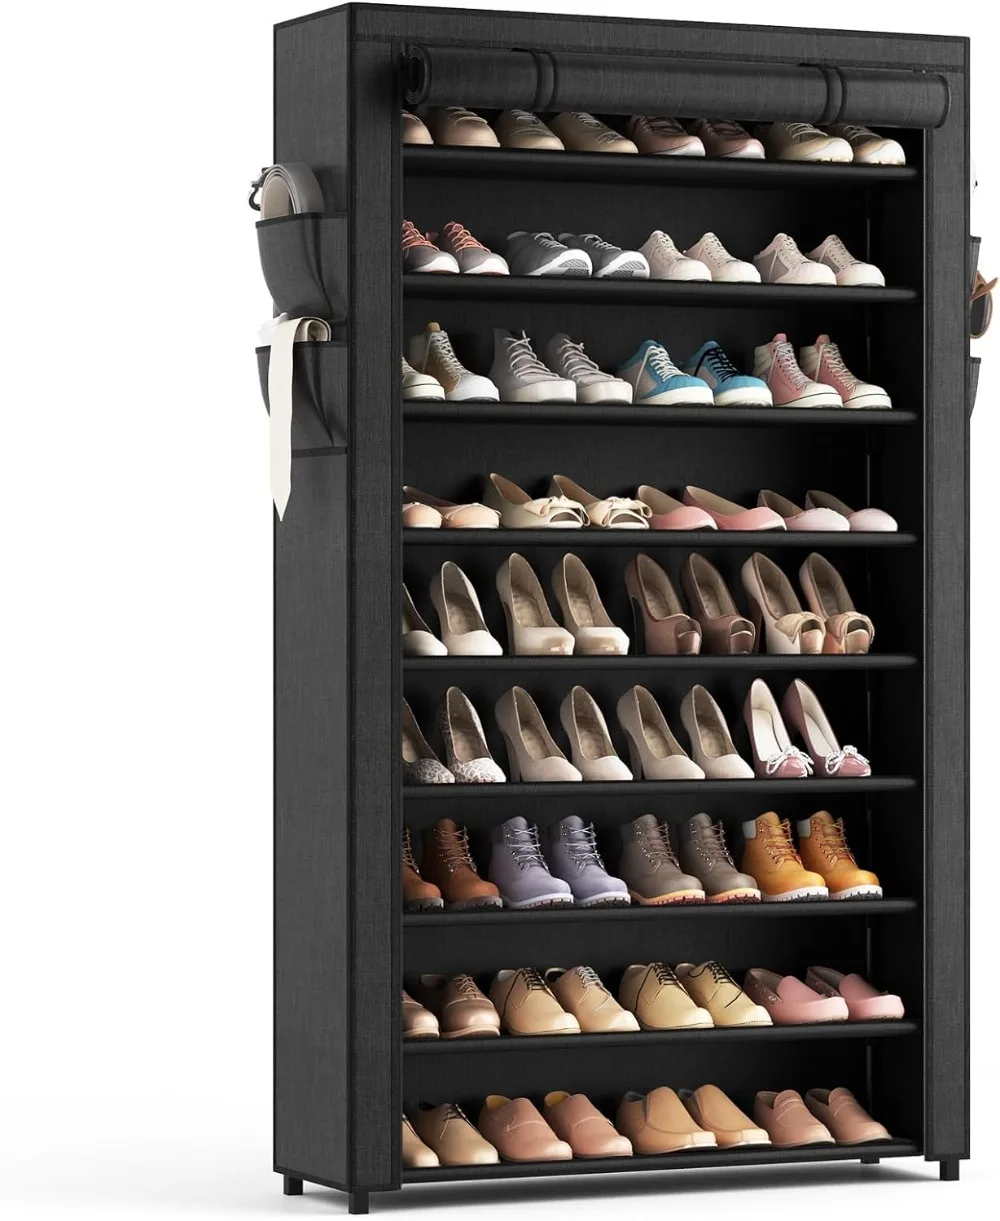 

Shoe Rack with Covers - 10 Tiers Tall Shoe Rack Organizer Large Capacity Shoe Shelf Storage 40 Pairs Space Saving Vertical